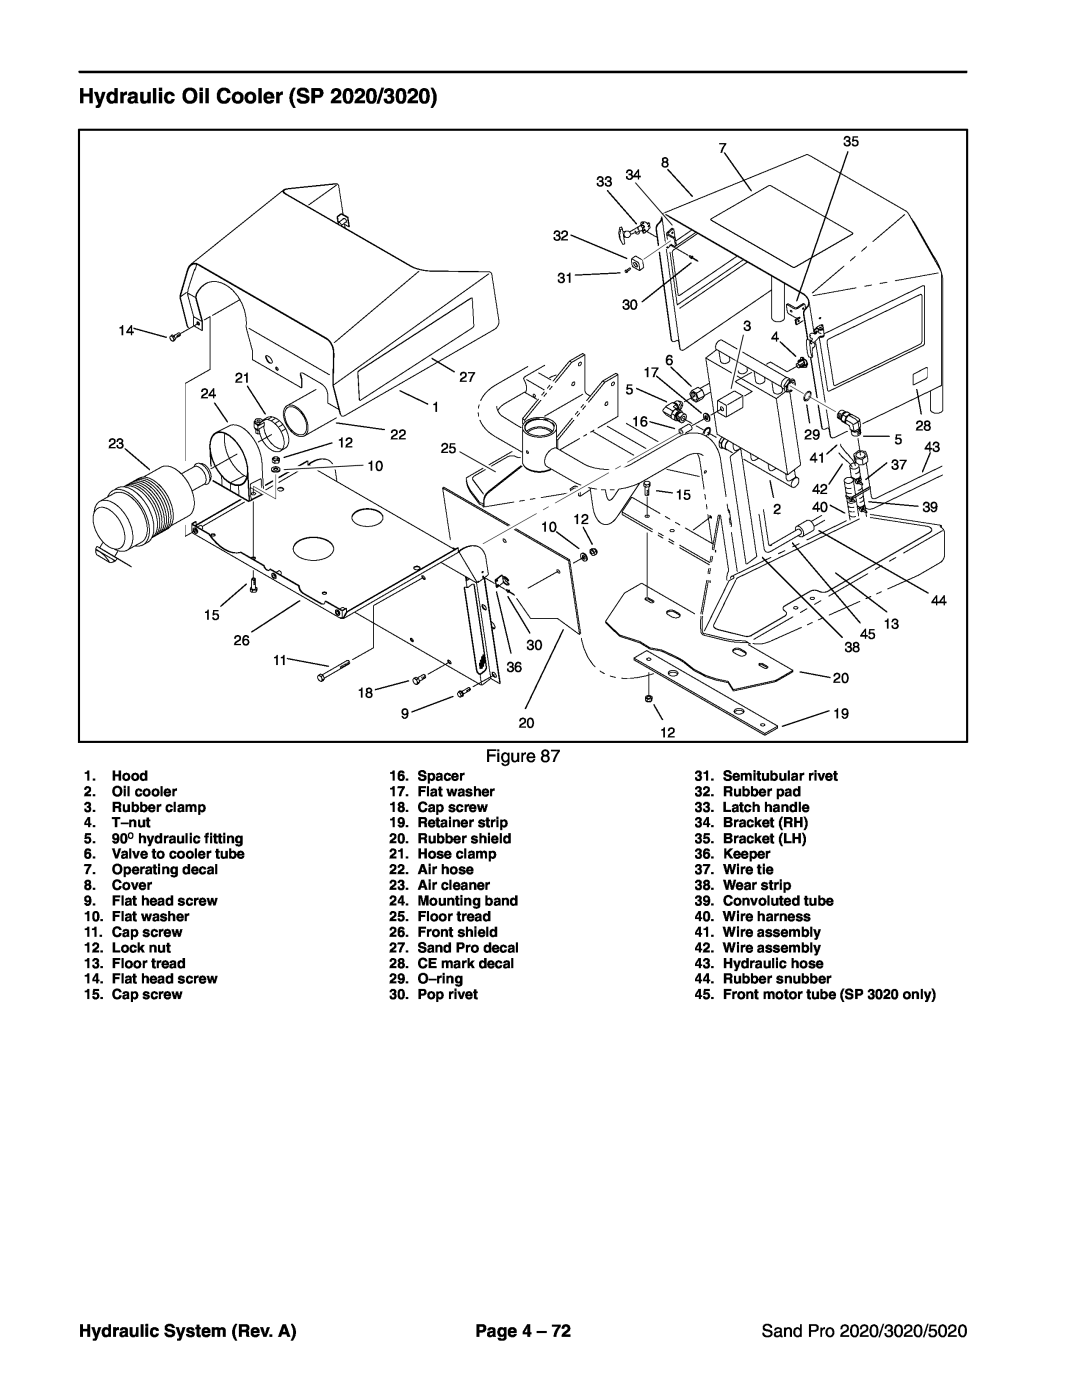 Toro service manual Hydraulic Oil Cooler SP 2020/3020, Hydraulic System Rev. A, Page 4, Sand Pro 2020/3020/5020 